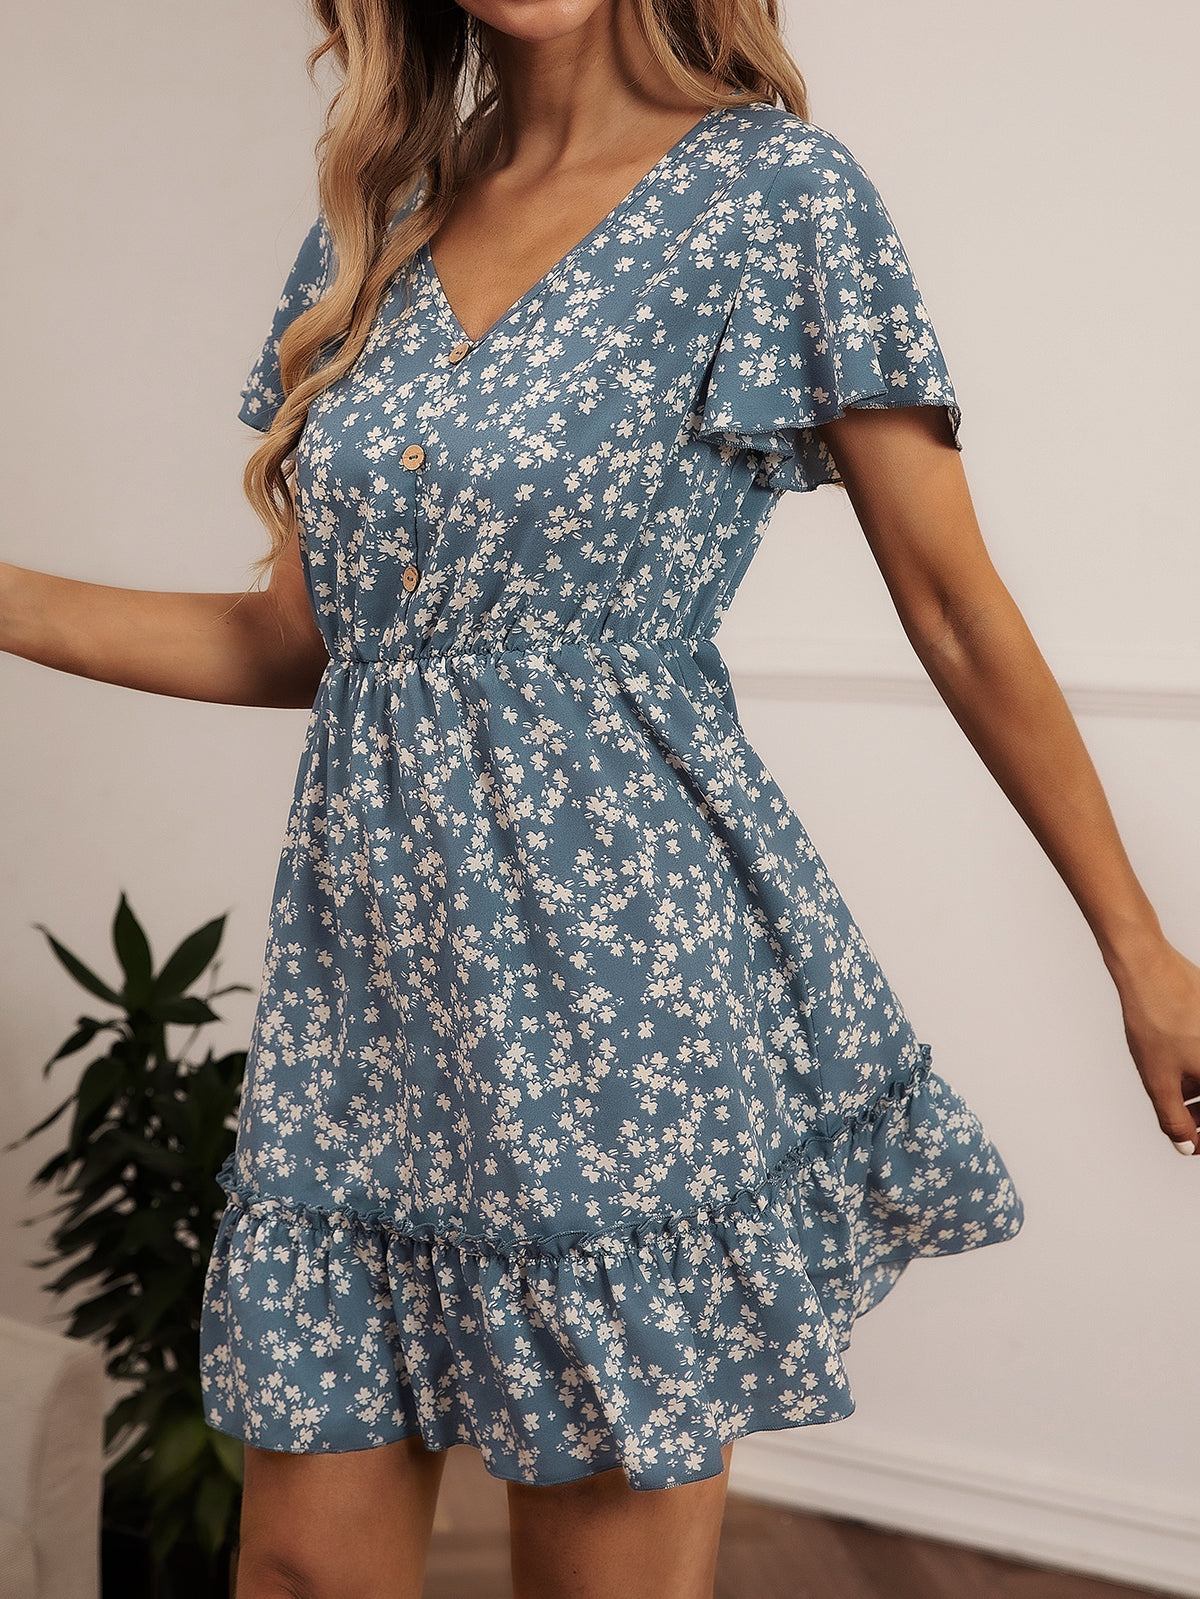 Floral Print Dress with Ruffle - 